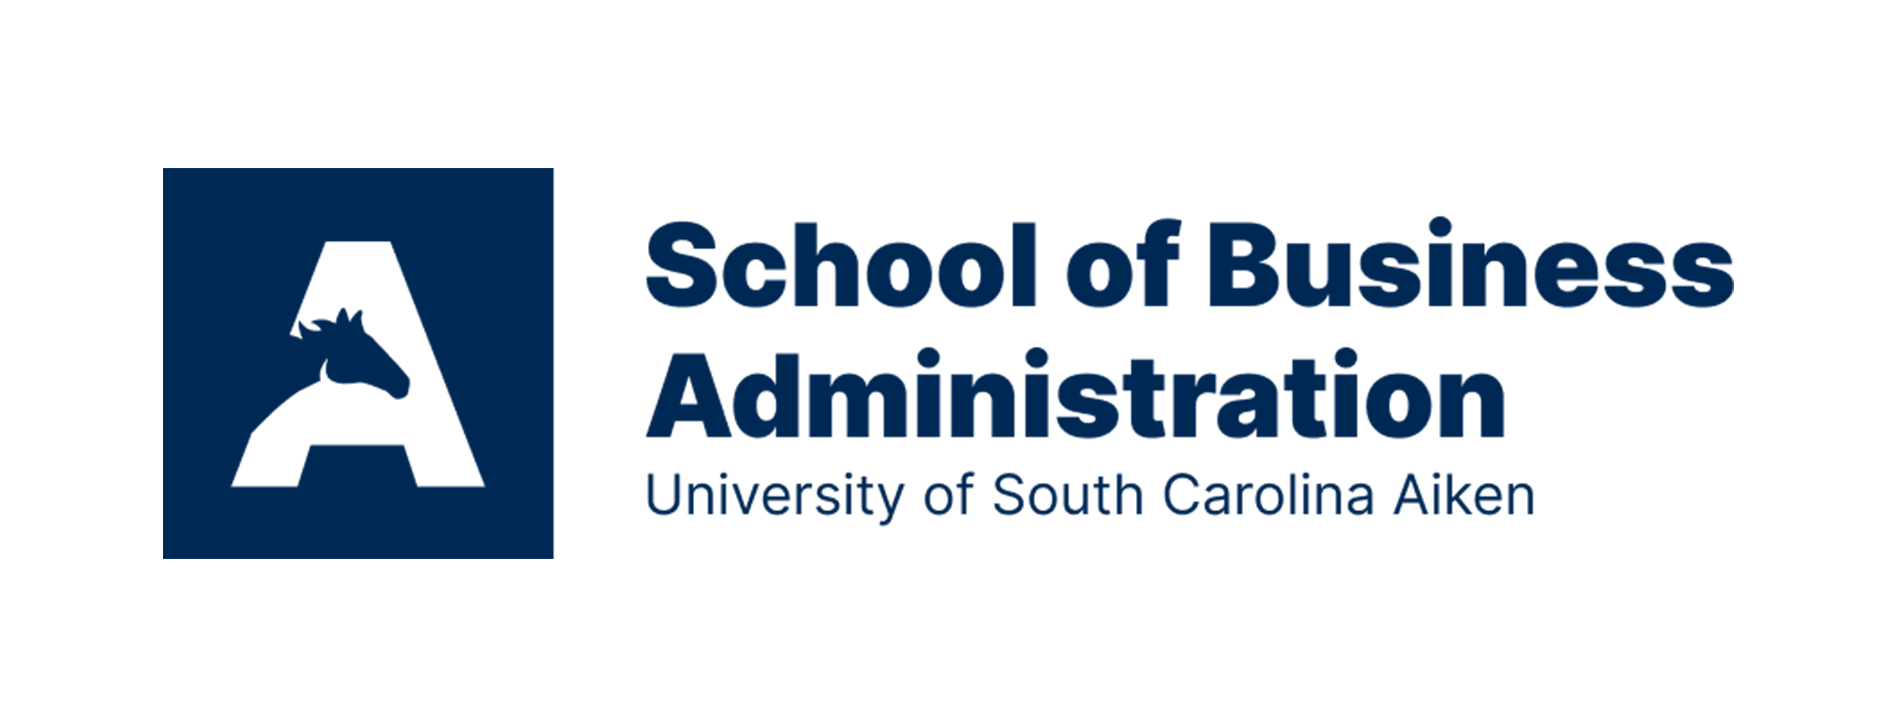 School of Business Administration